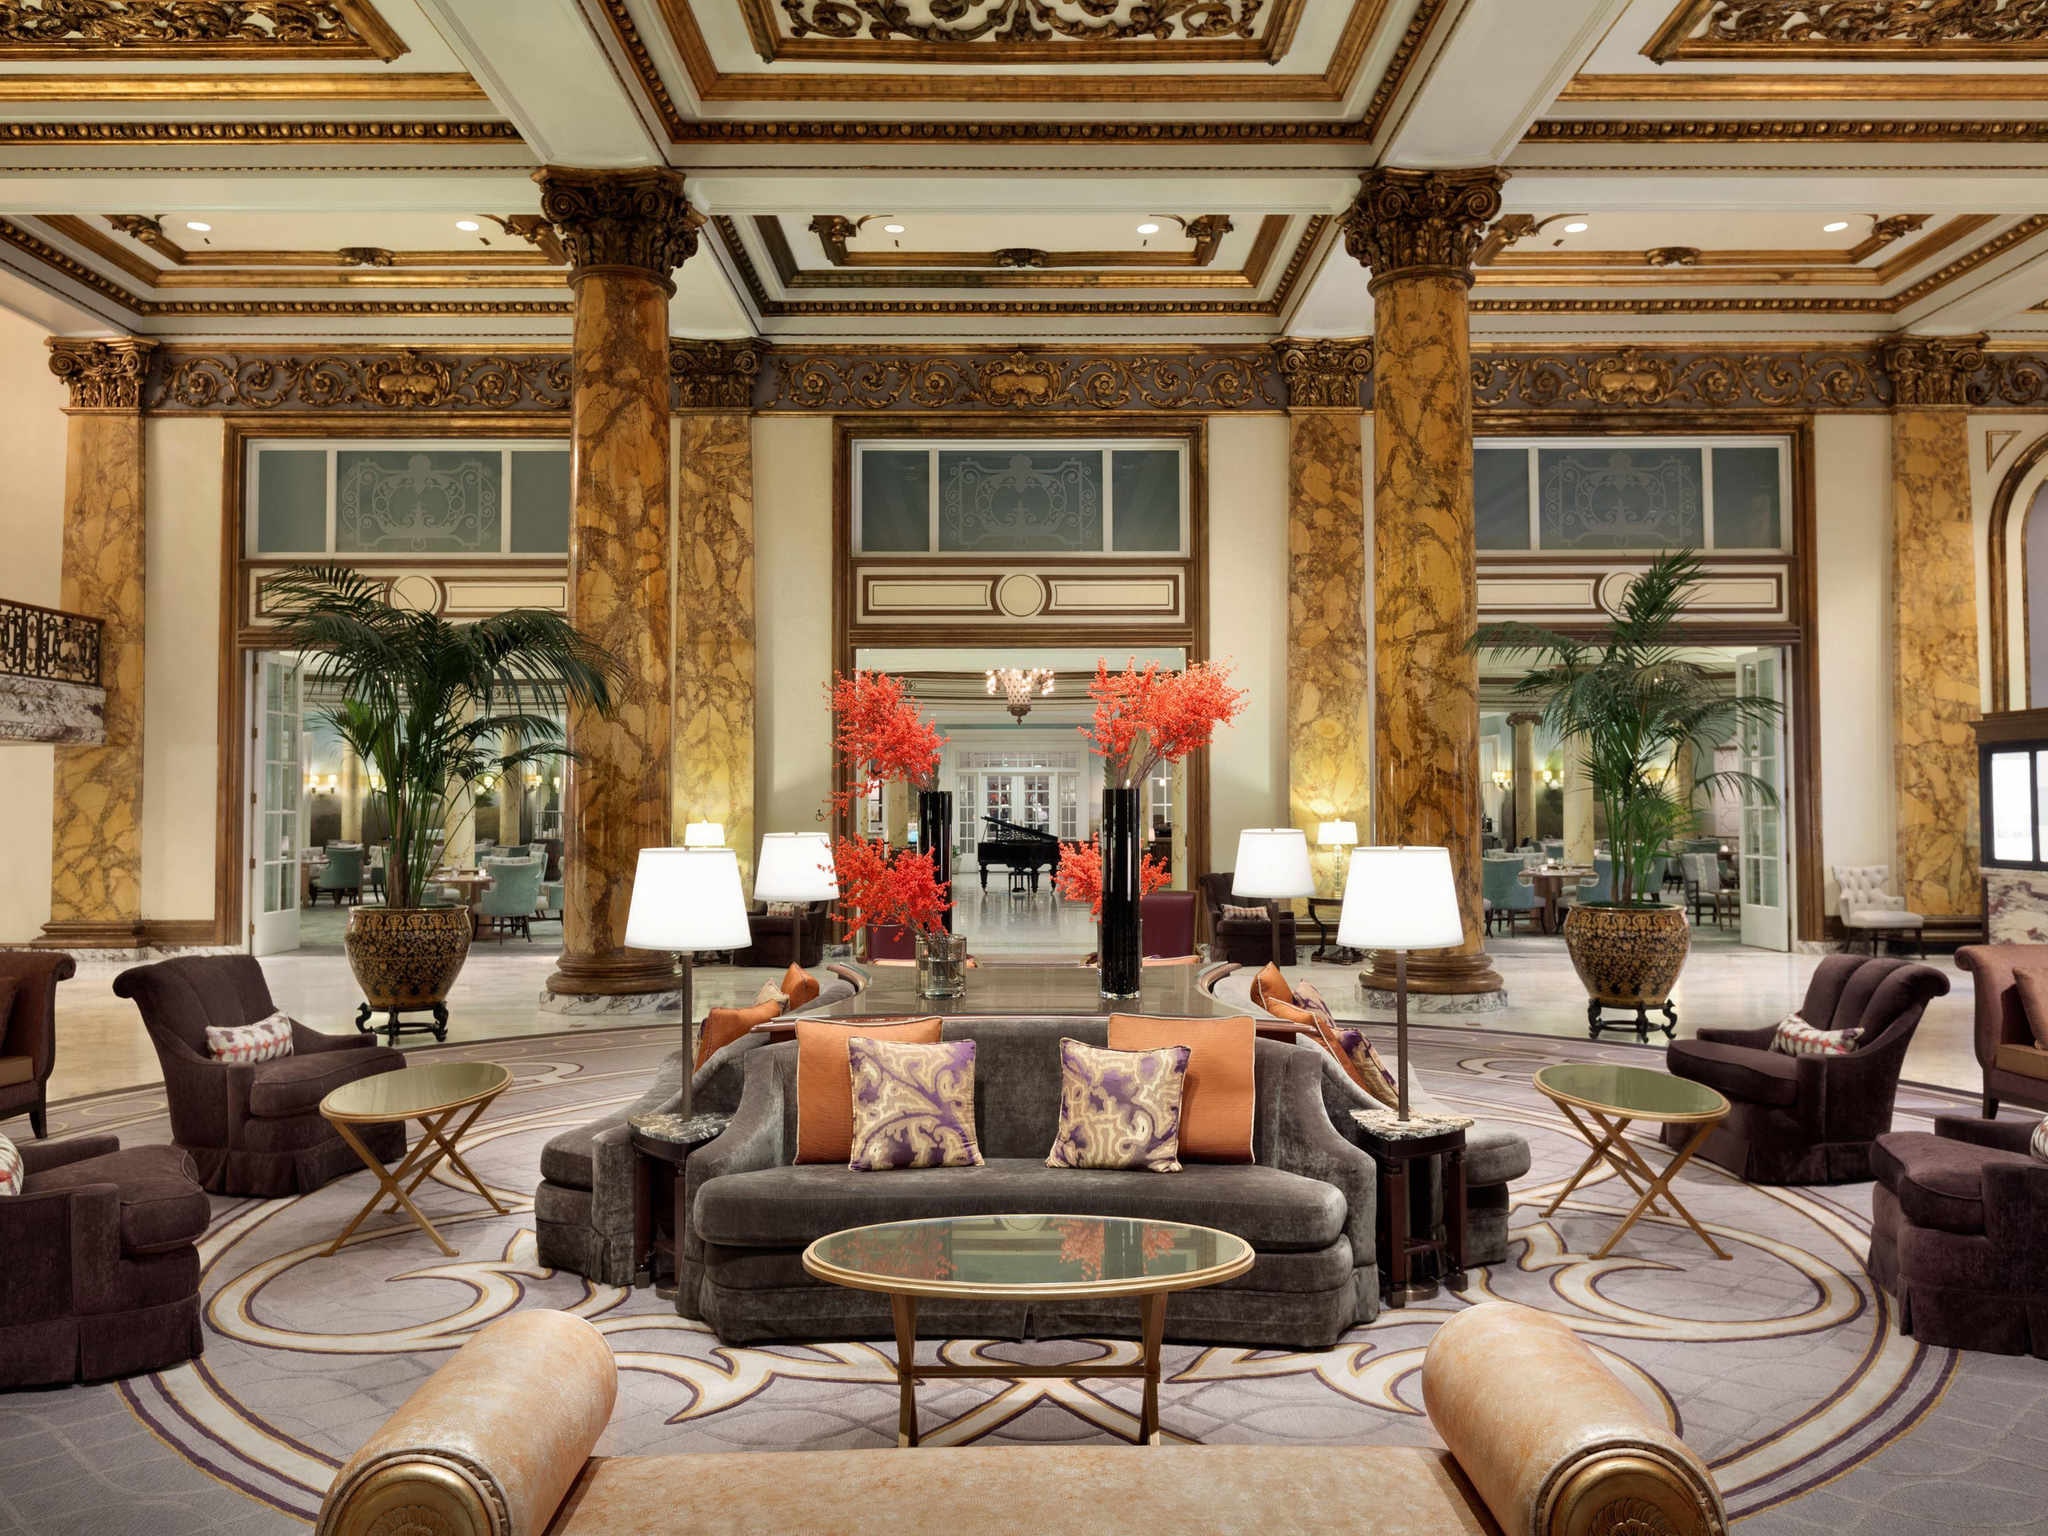 The 20 Best Hotel Lobbies in the World